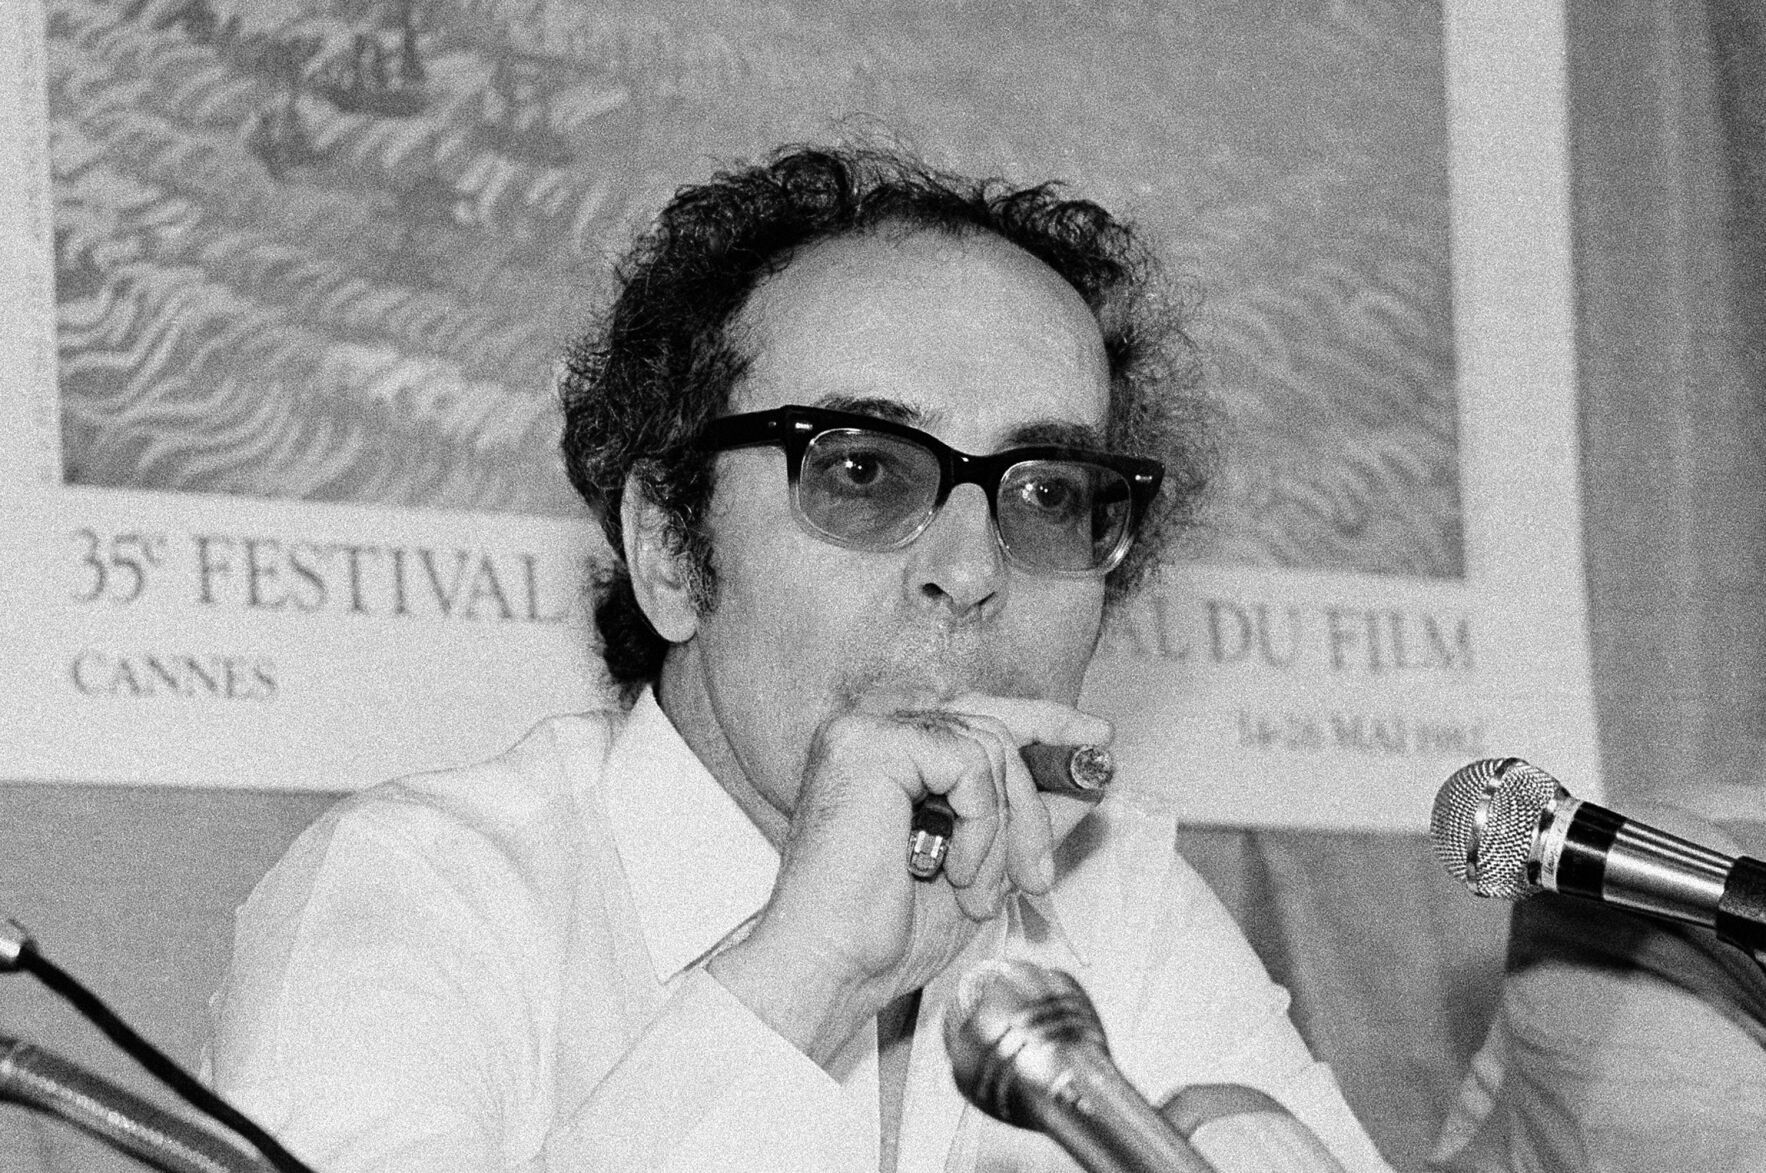 Iconic director Jean-Luc Godard dead at 91, French media report pic